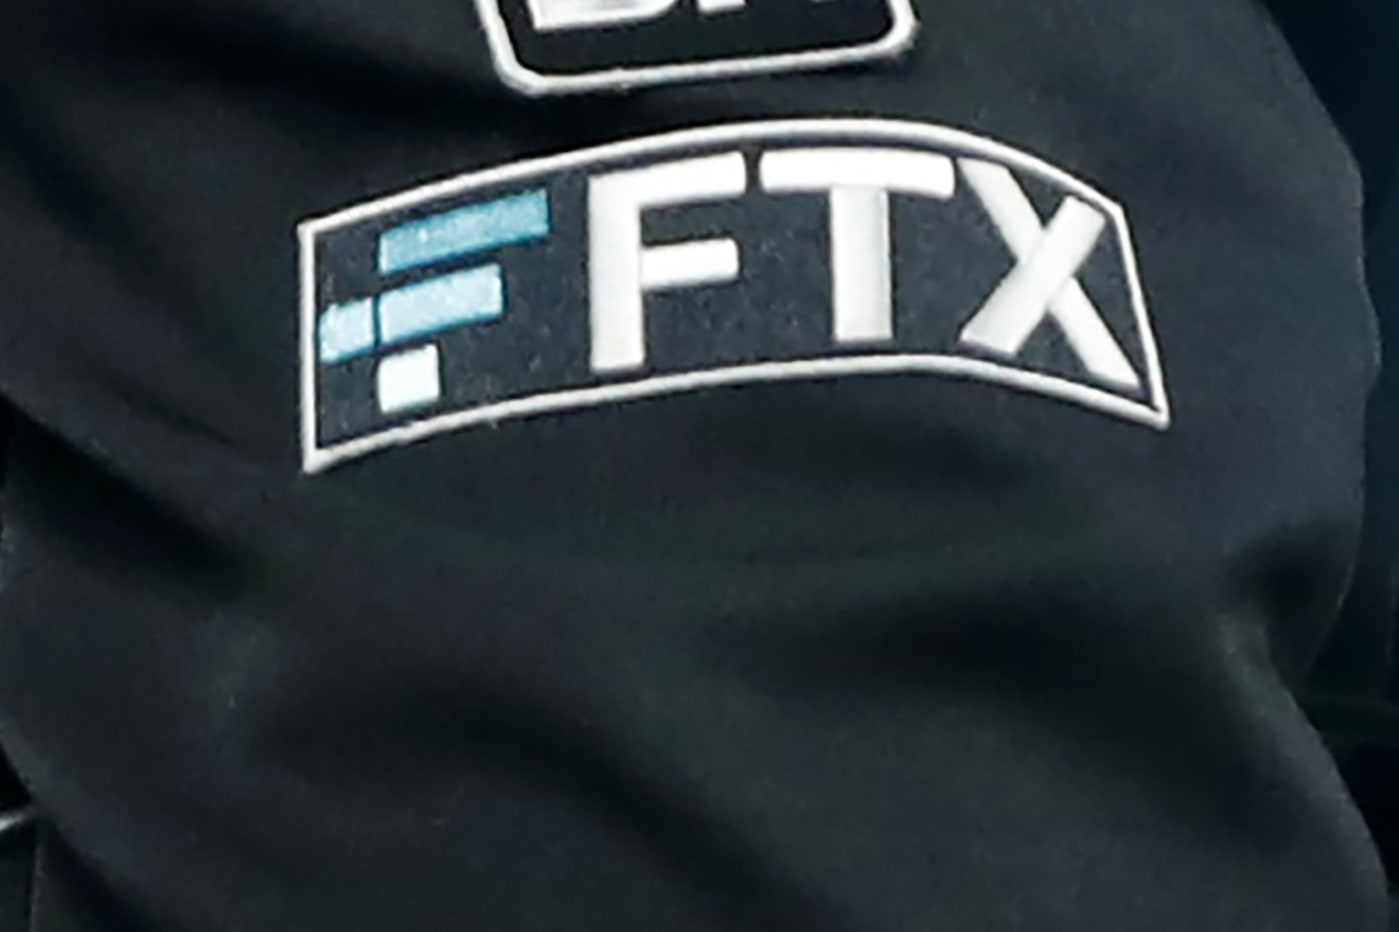 FTX plans to refund defrauded customers with interest